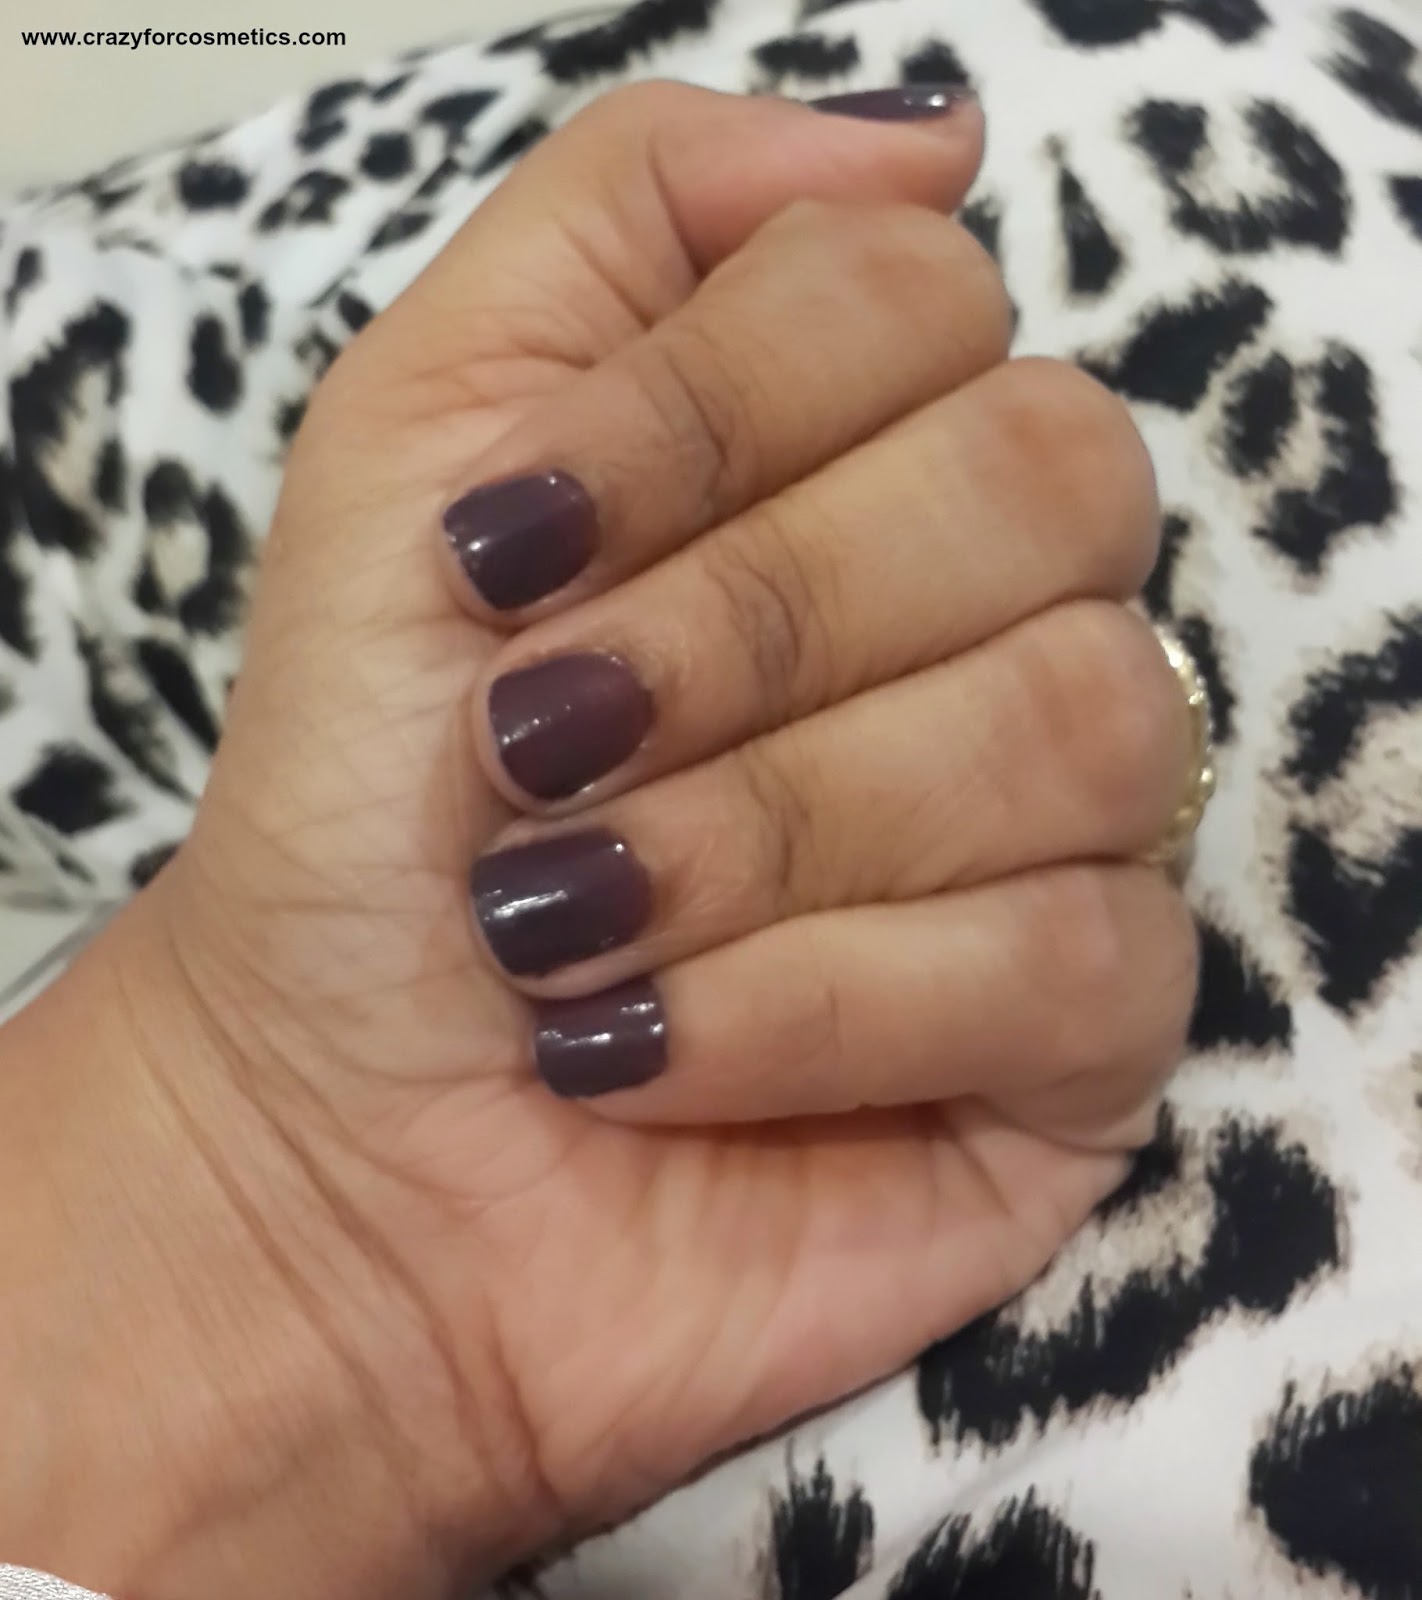 maybelline color show nail polish review-maybelline color show nail polish midnight taupe- maybelline color show midnight tAUPE-maybelline color show nail polish review india- maybelline color show nail polish India-